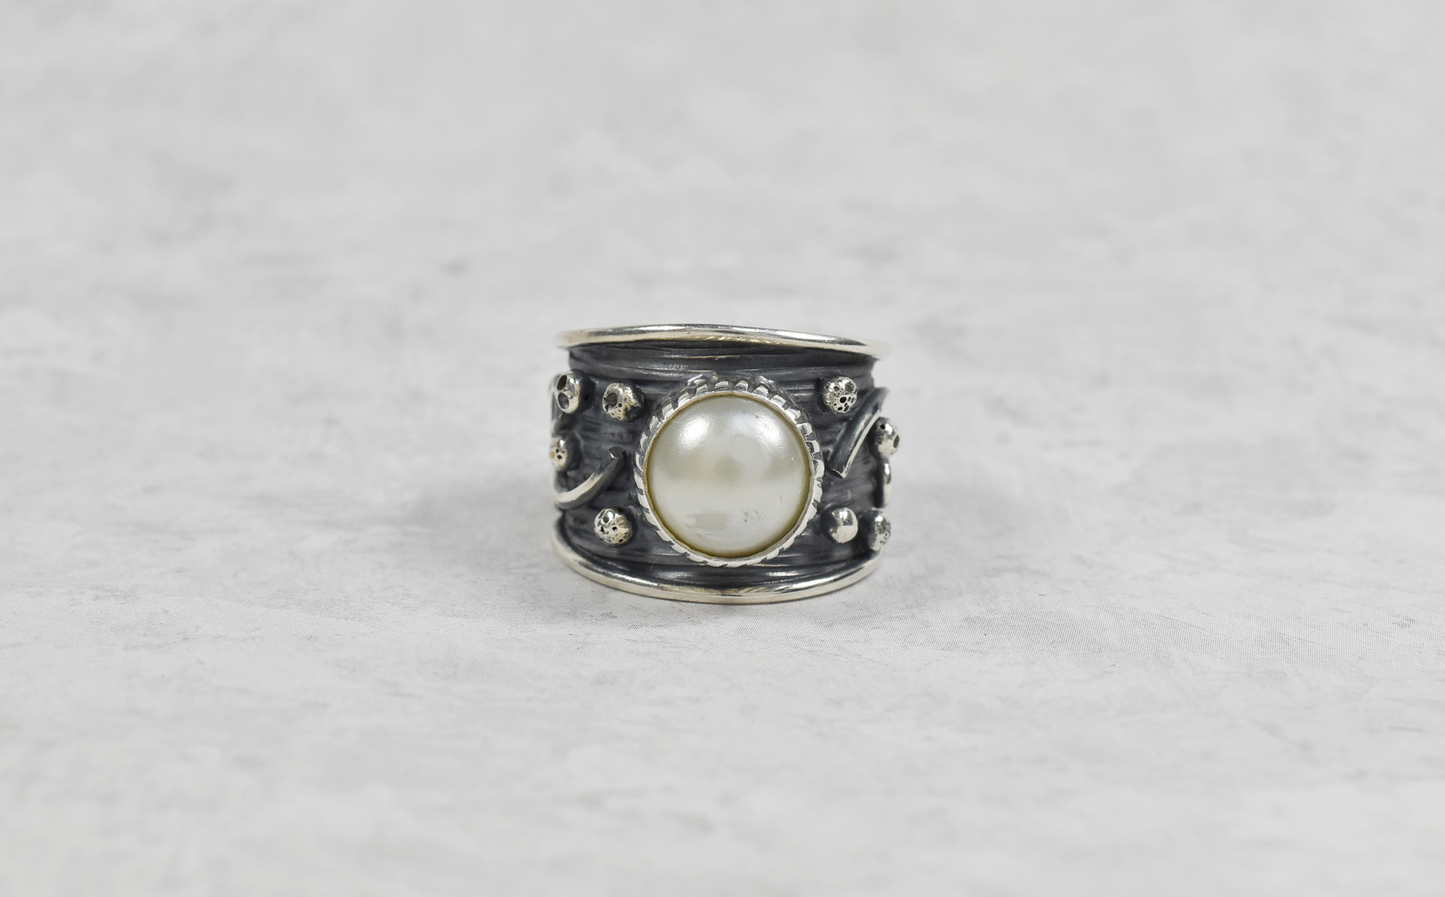 Sterling Silver 950 Adjustable Ring with Synthetic Pearl, Current size 6.5 - 8.7g